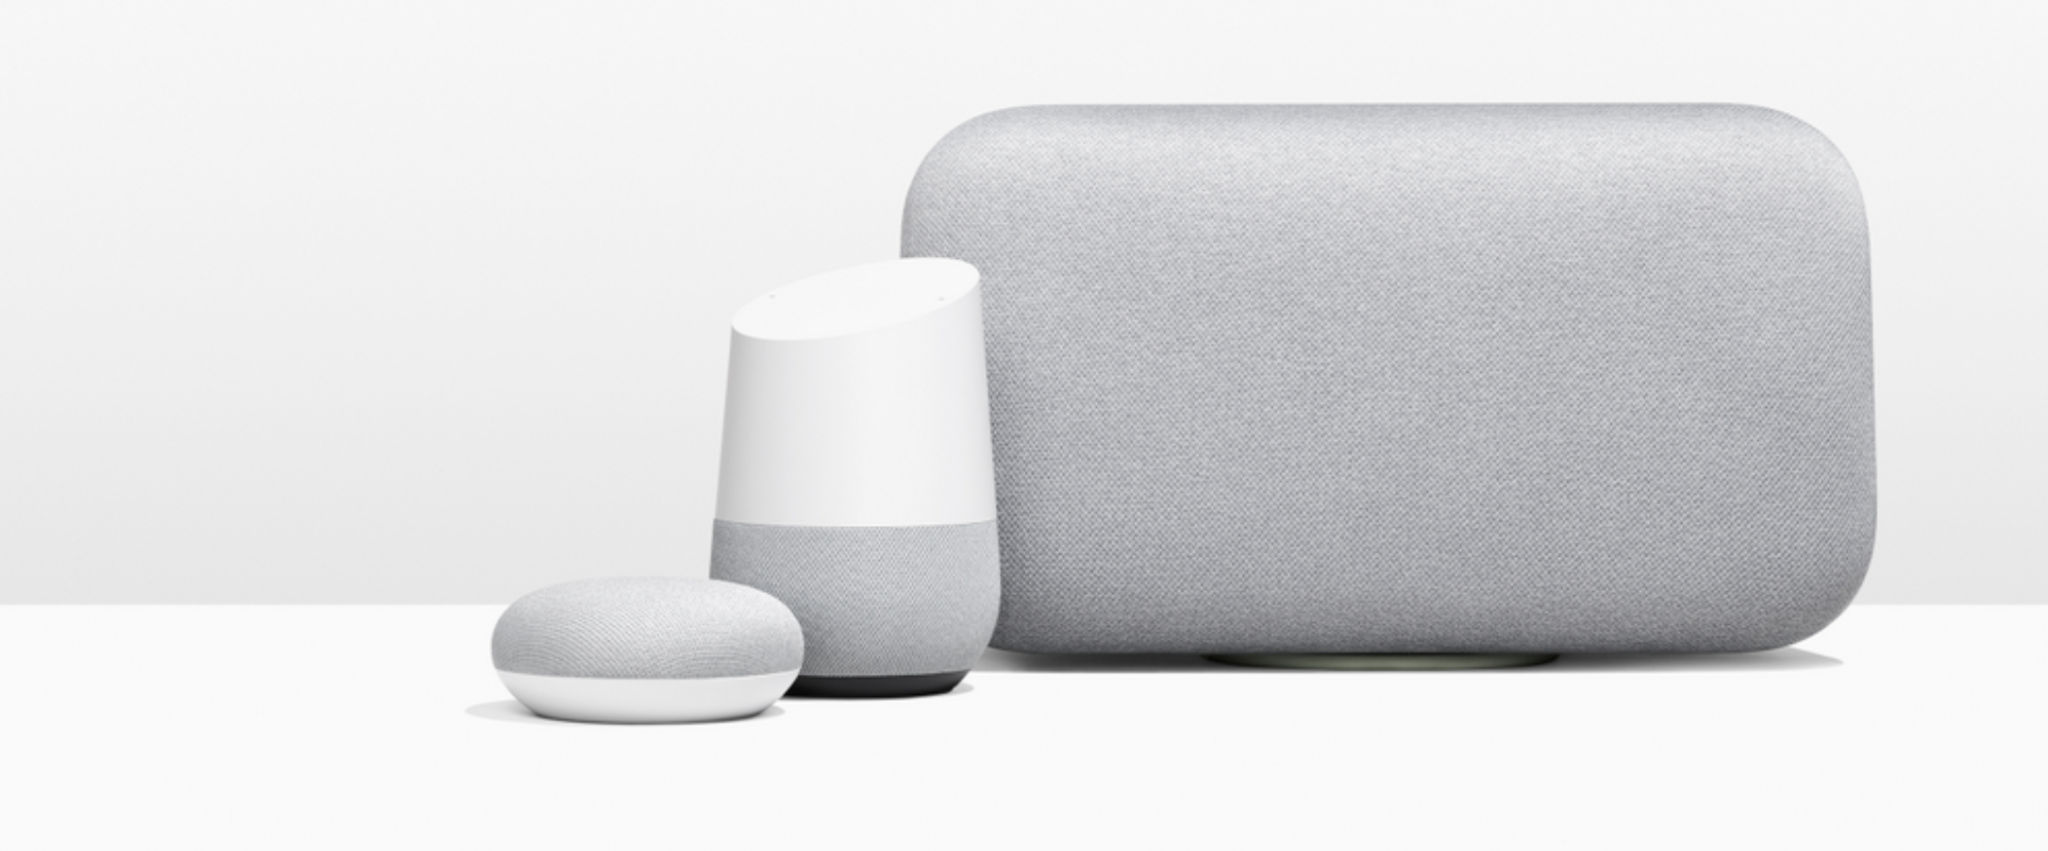 Google Will Reportedly Introduce a ‘Nest Wifi’ Device Next Month